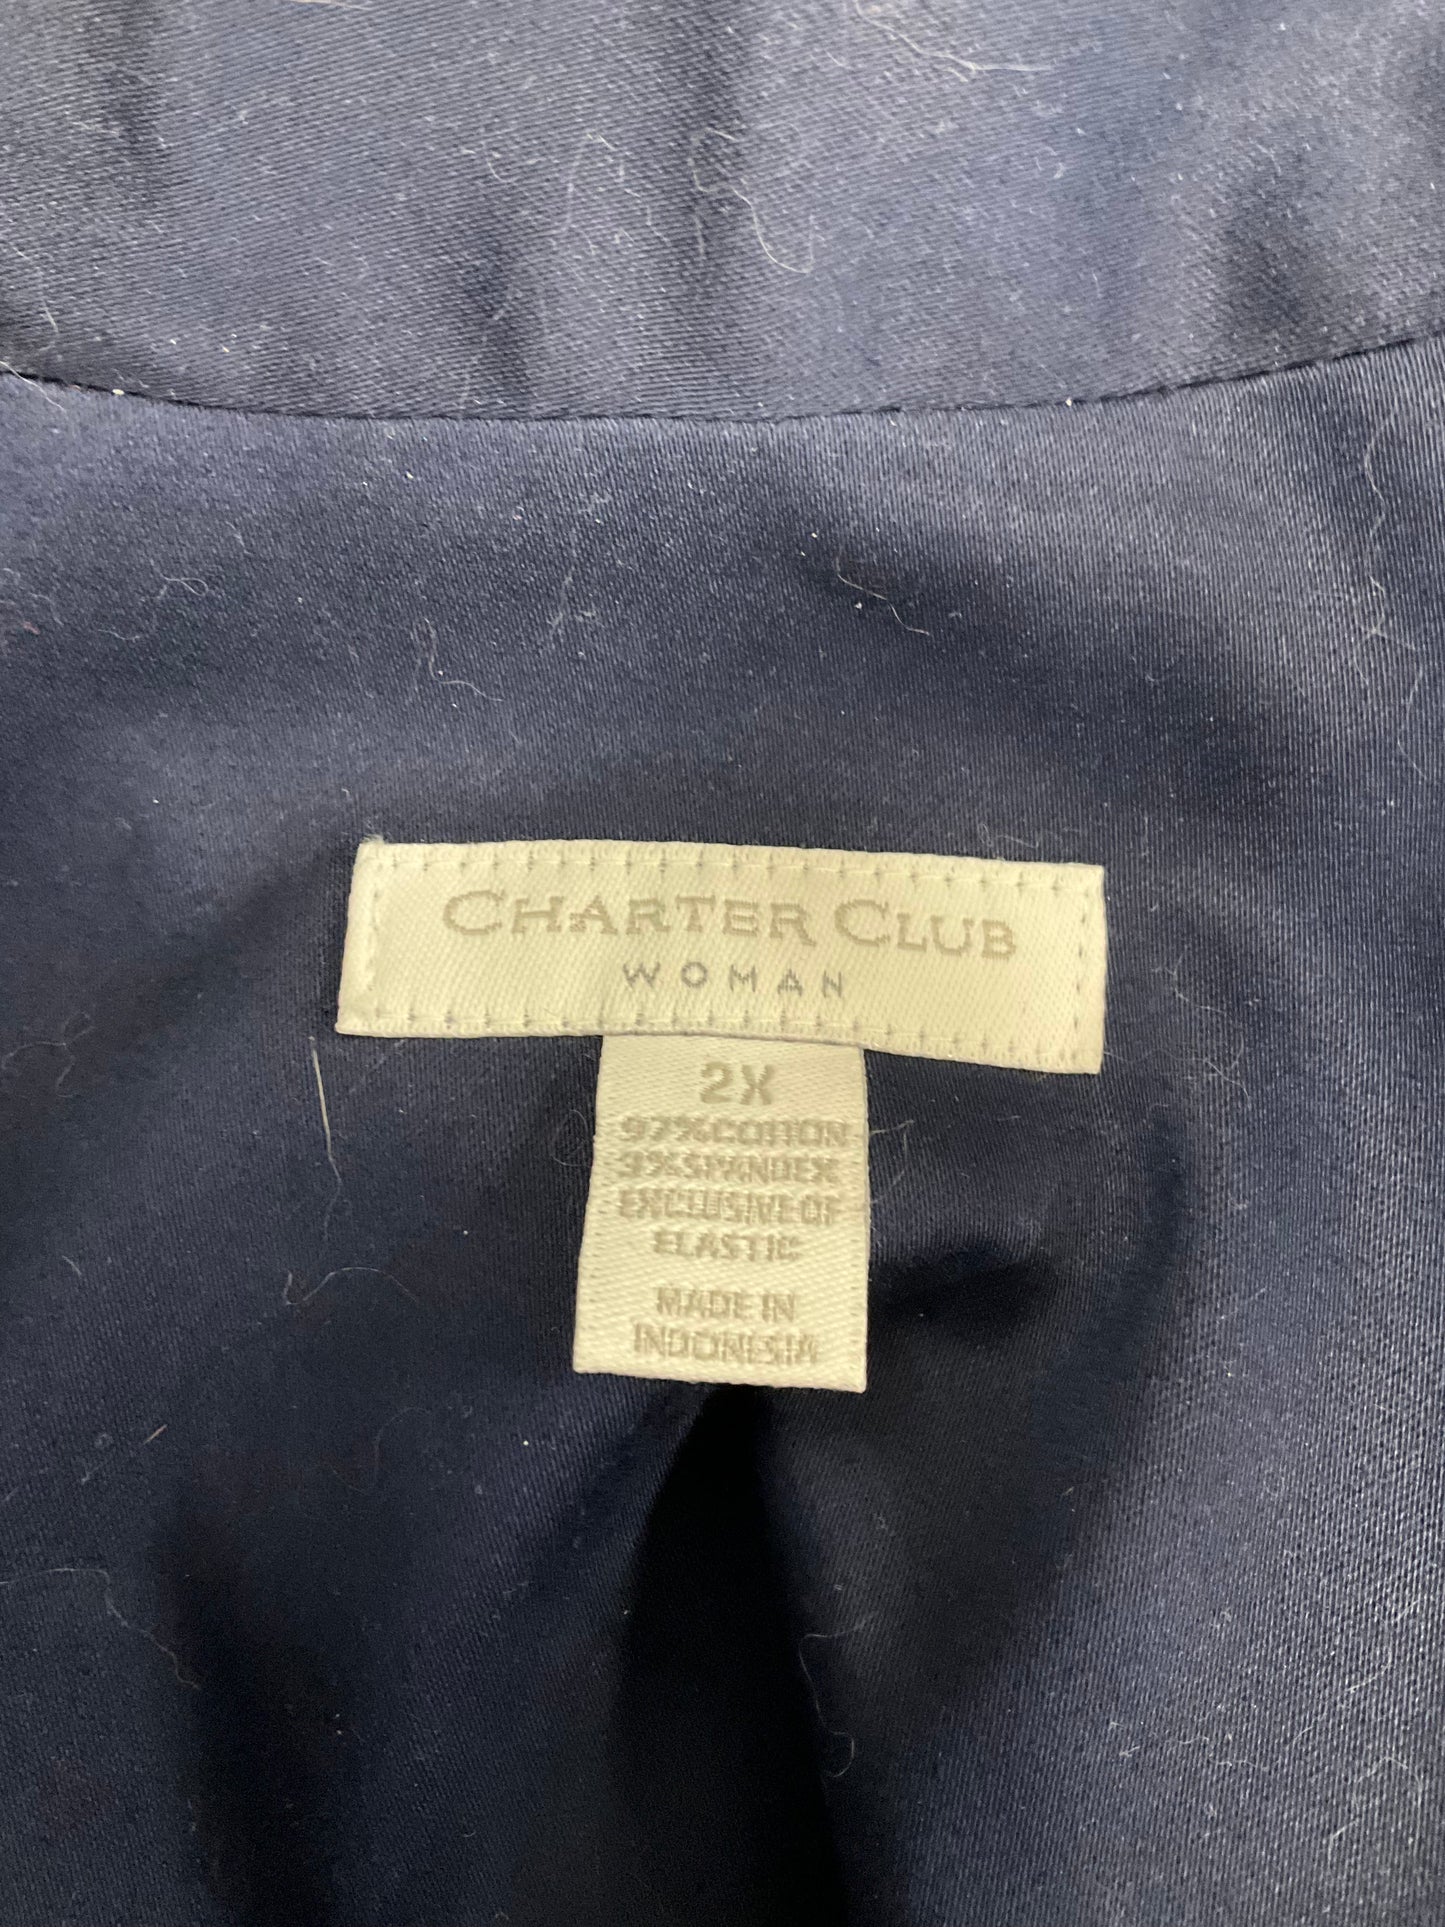 Navy Jacket Other Charter Club, Size 2x